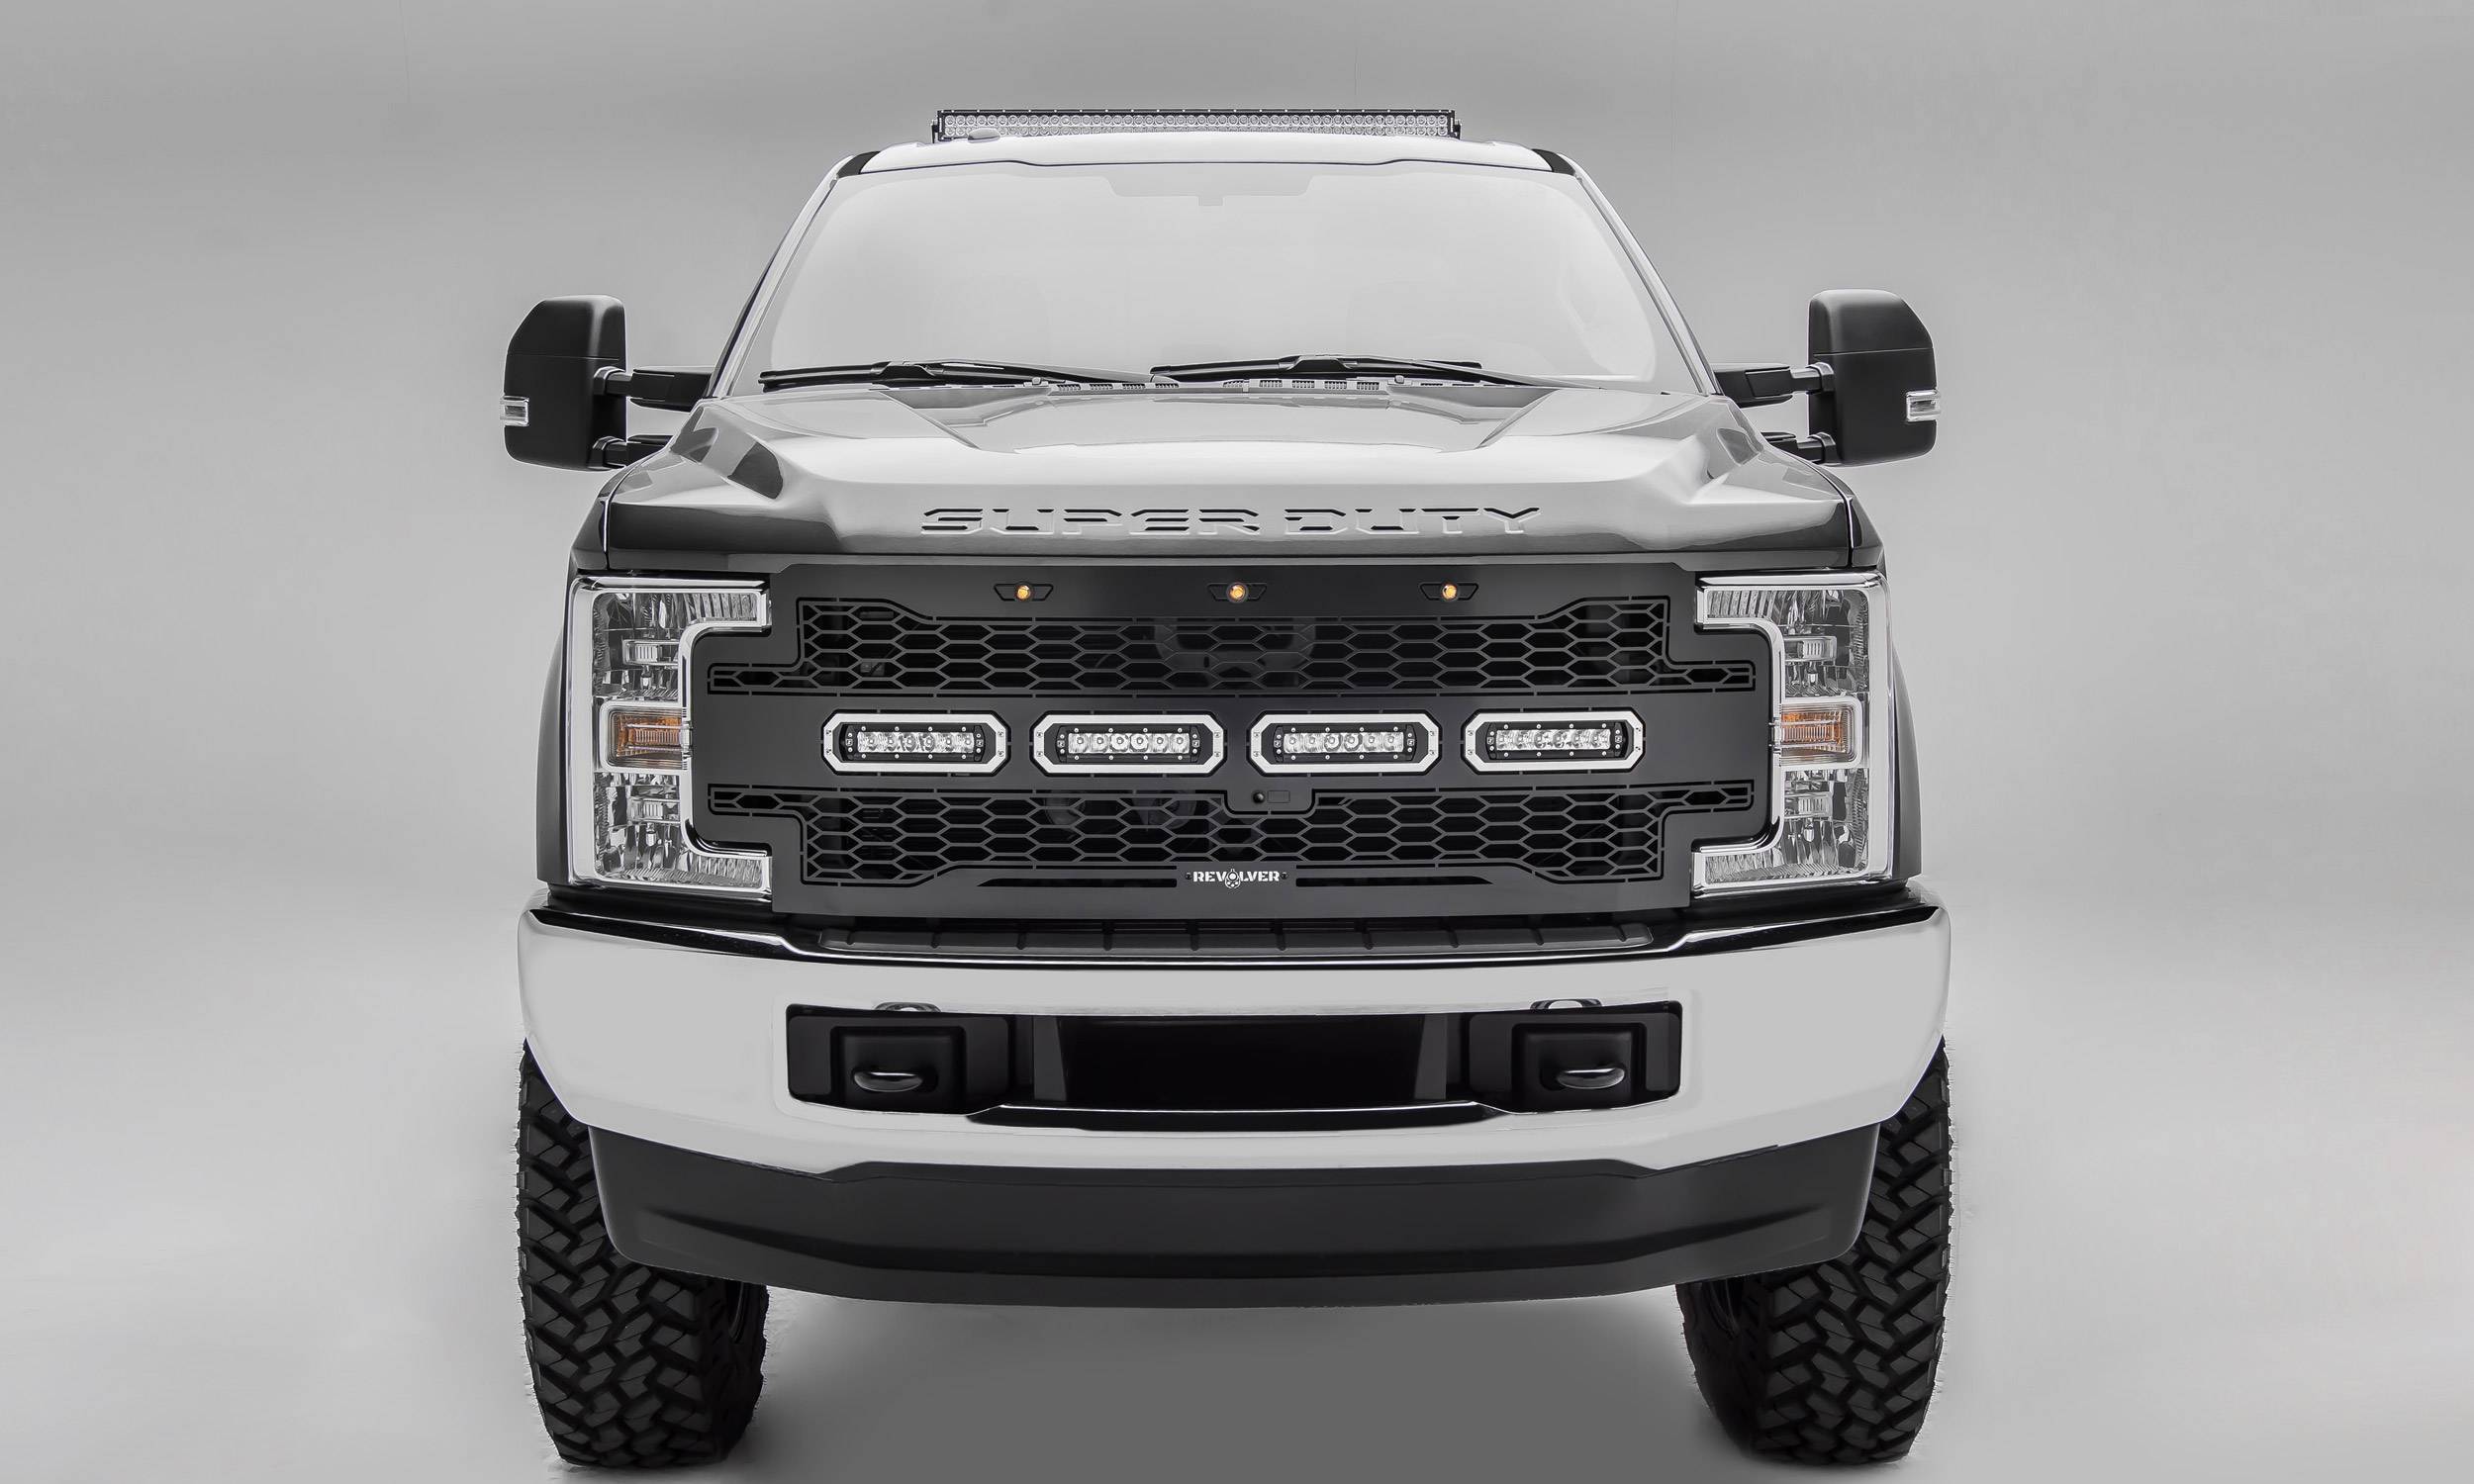 T-REX Grilles - 2017-2019 Super Duty Revolver Grille, Black, 1 Pc, Replacement with (4) 6" LEDs, Fits Vehicles with Camera - Part # 6515631